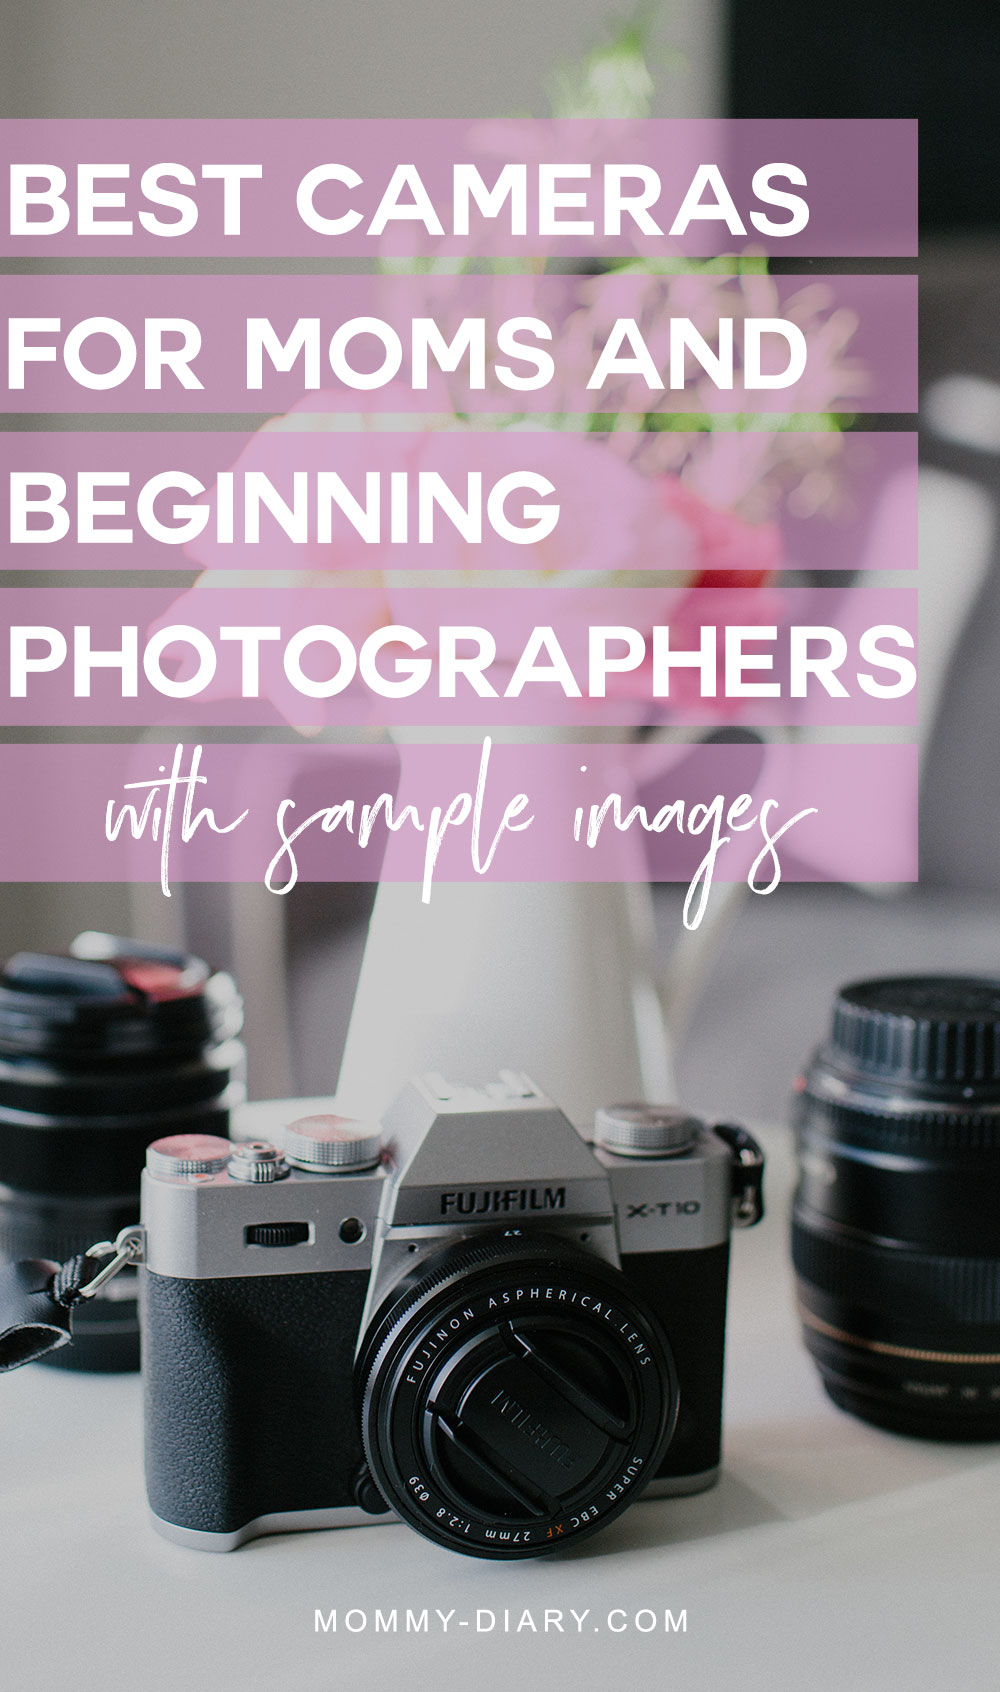 Best Cameras For Moms And Beginning Photographers